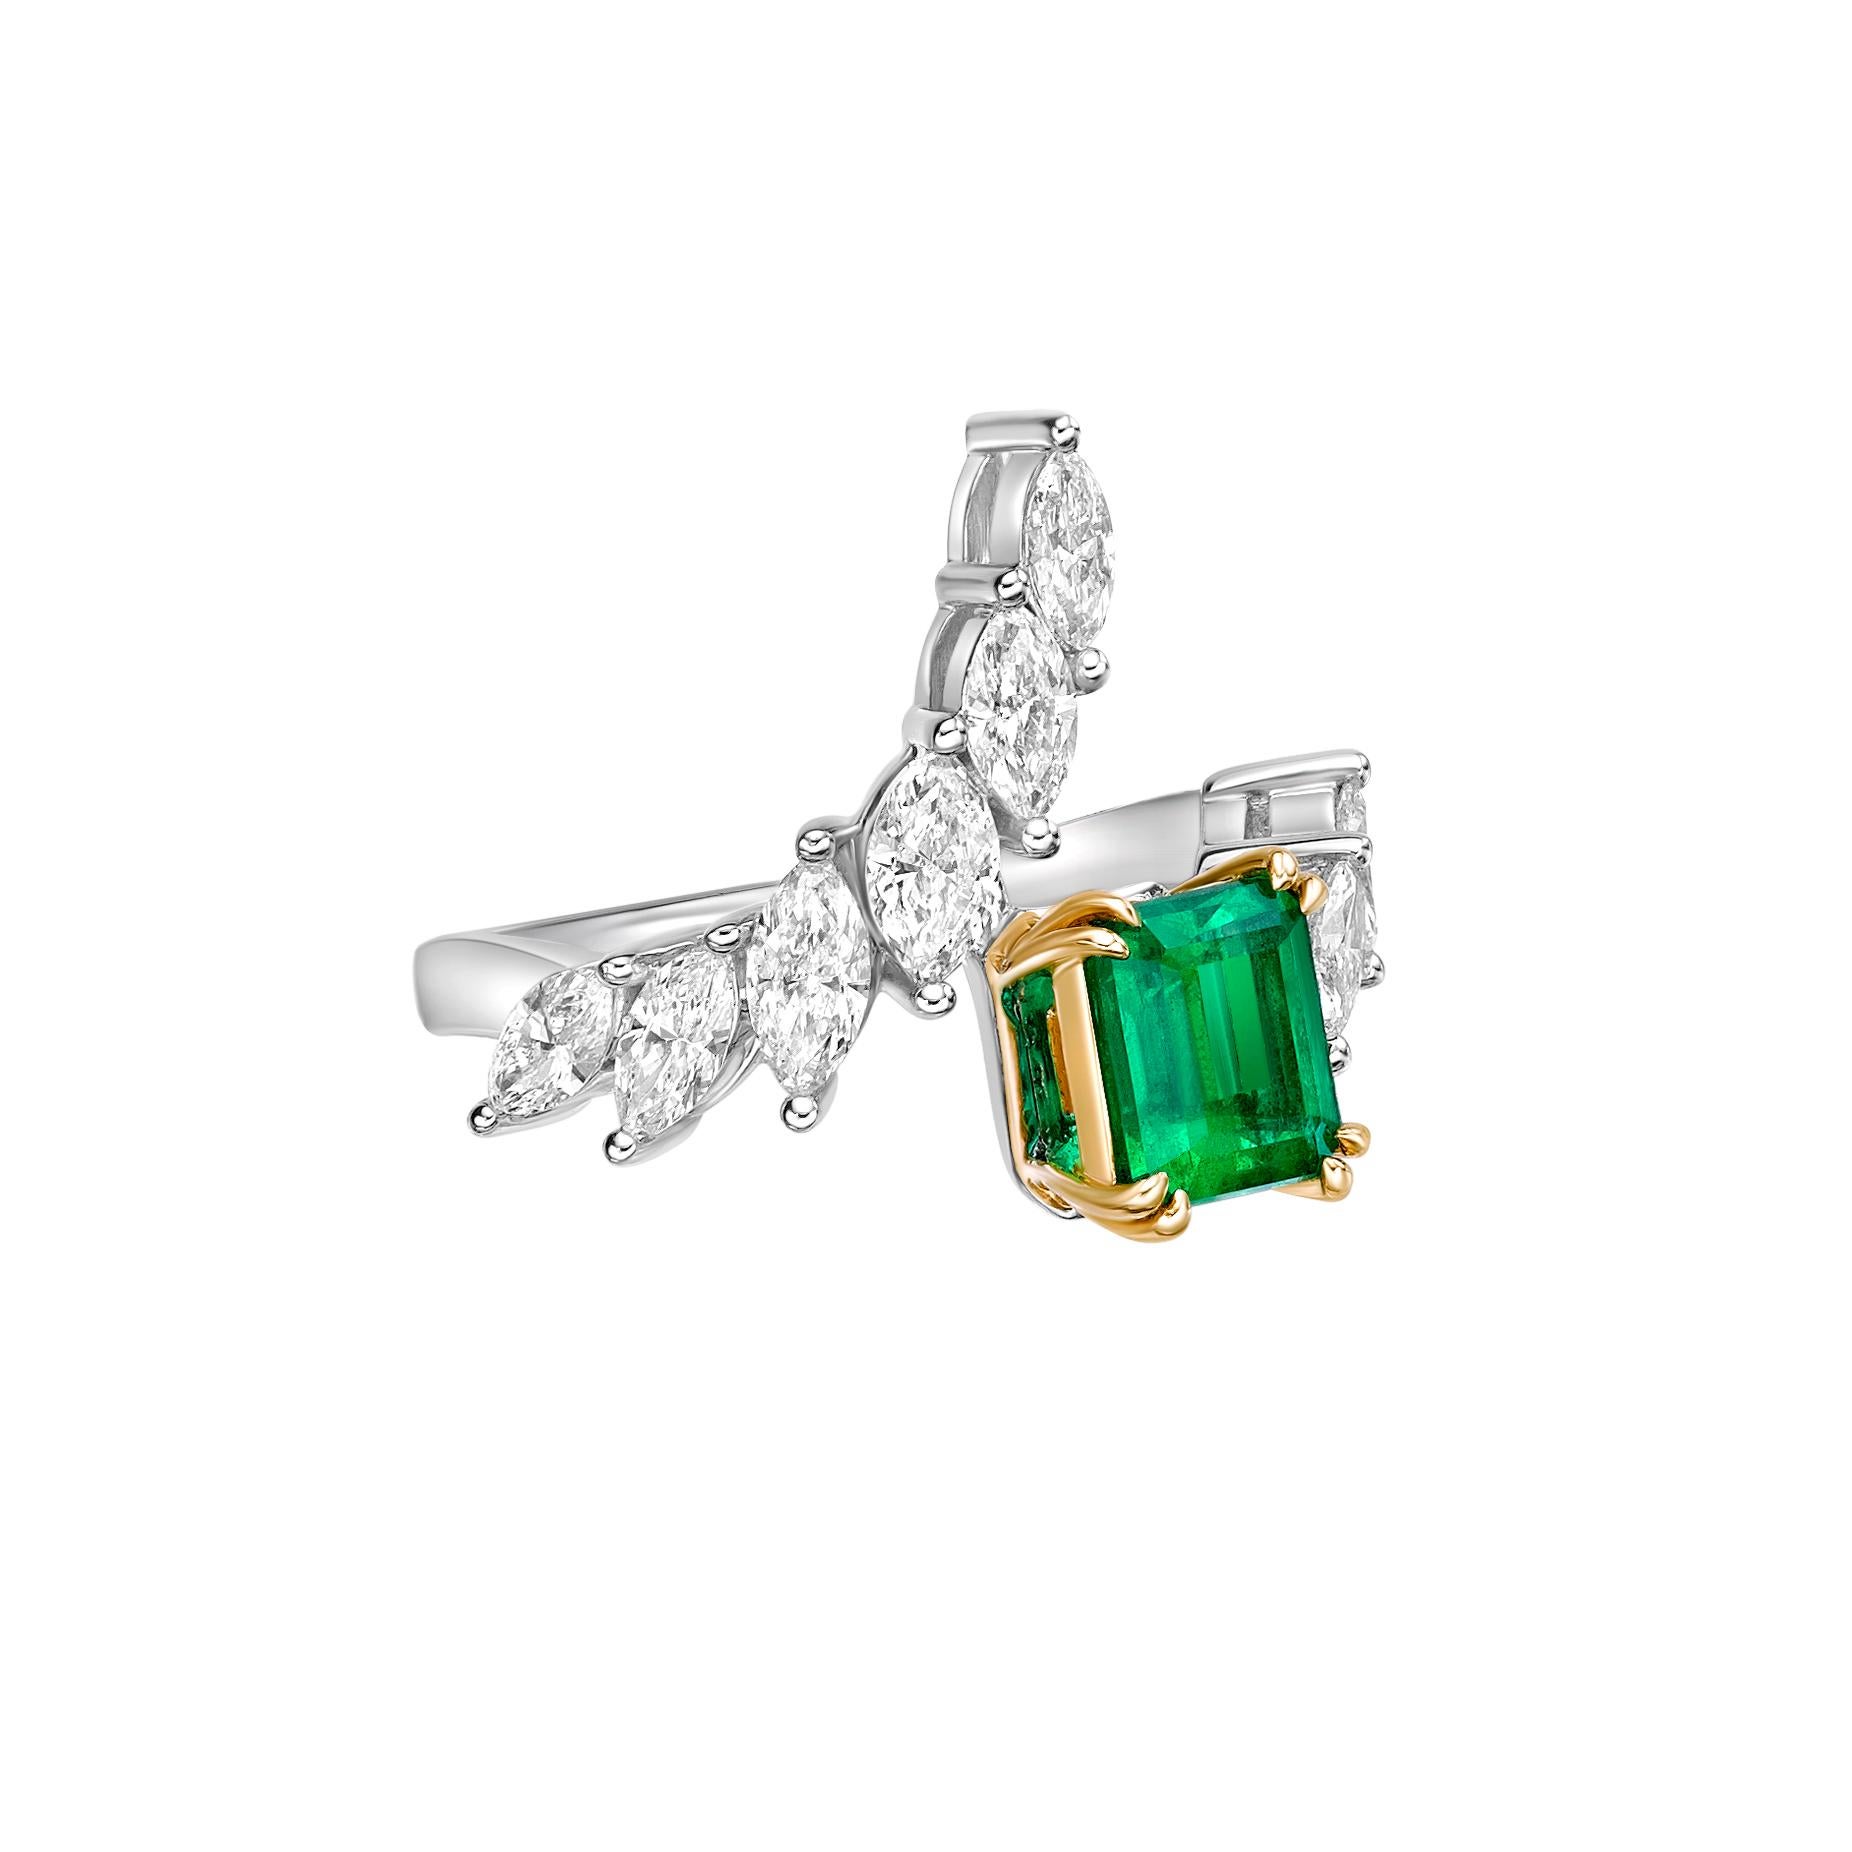 This lovely ring, with its modern design and classic beauty combined in this stunning piece of art, will enhance your elegance and grace. It's made of 18karat yellow gold and is designed to captivate hearts and elevate any special event.

Emerald